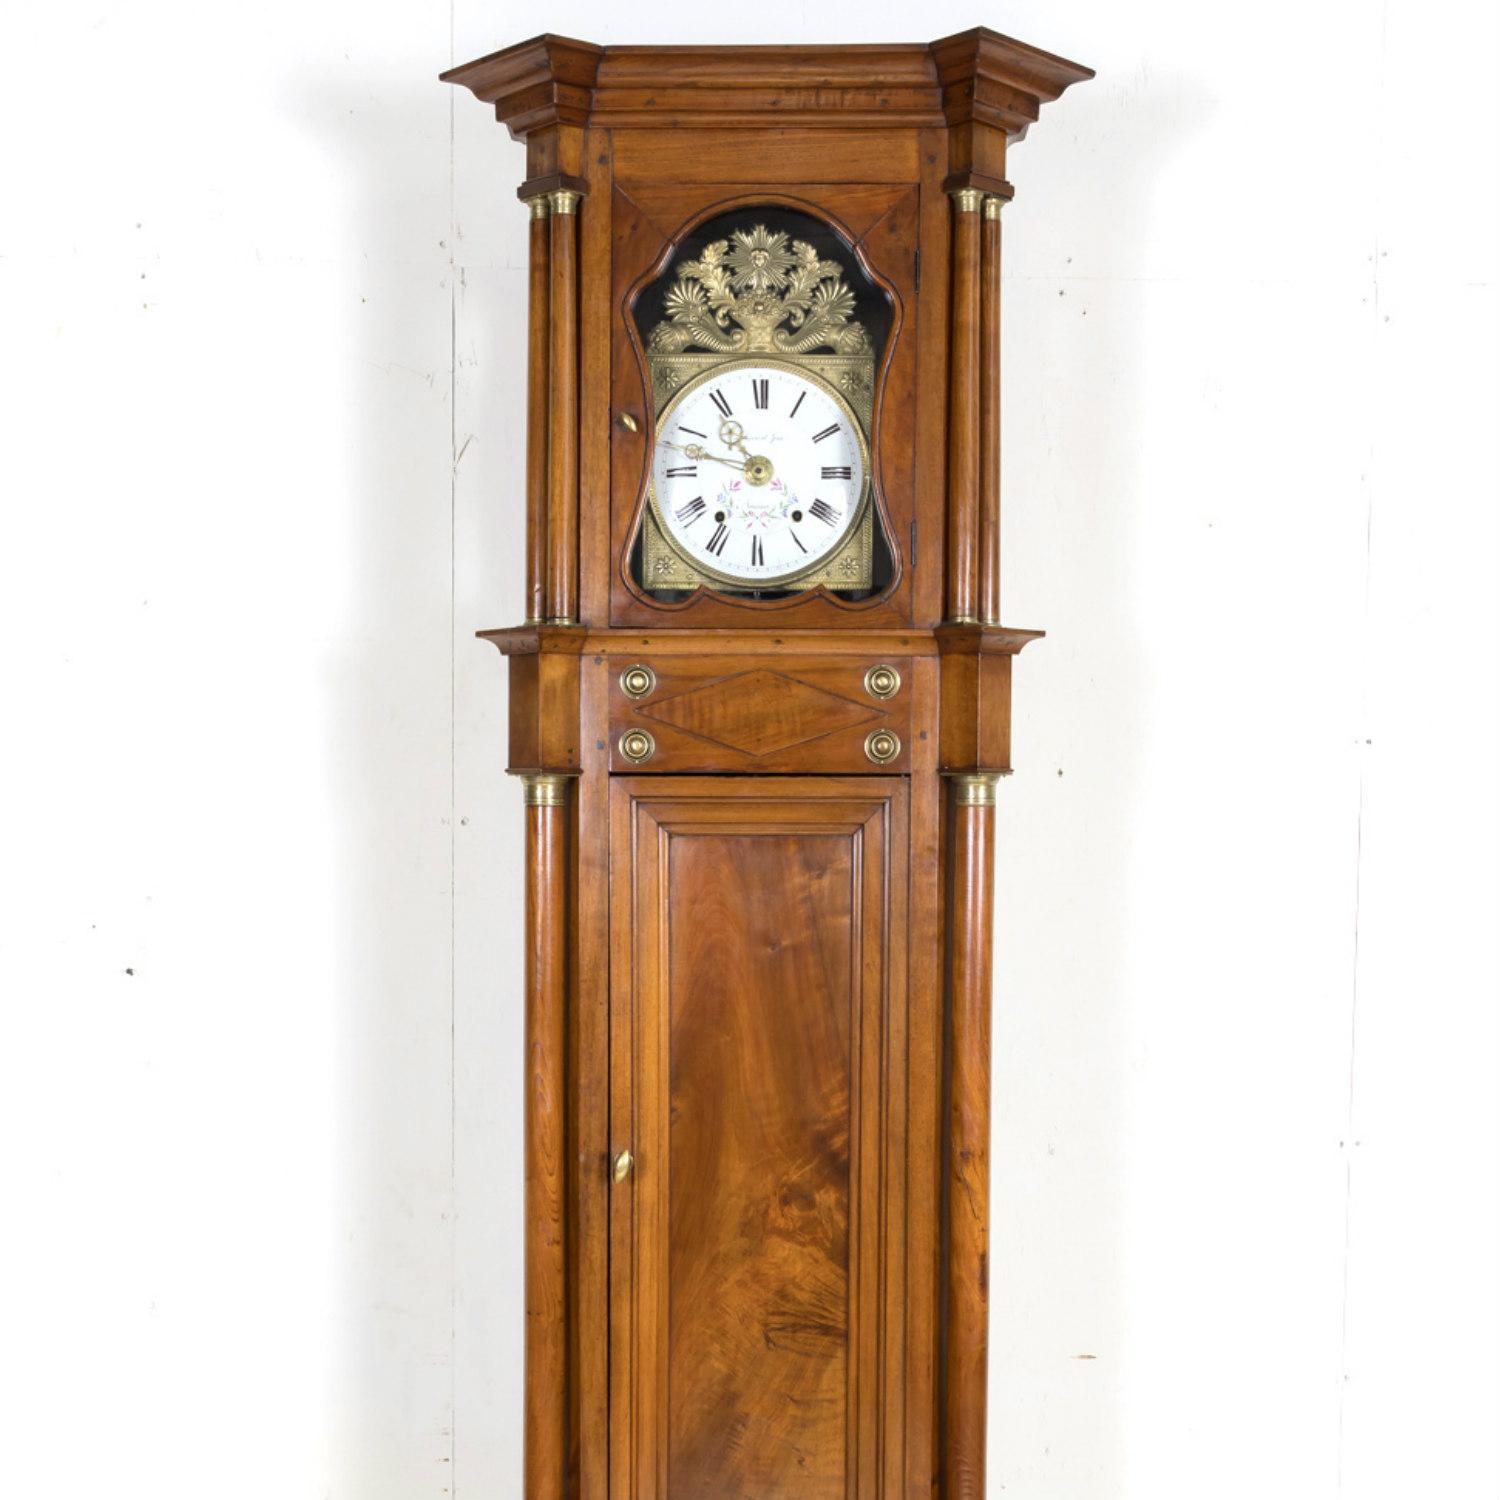 A stunning early 19th century French Empire period chateau longcase clock with eight-day comtoise movement handcrafted of solid walnut, circa 1815, all original. This tall, handsome chateau longcase clock, with a deep, rich patina that reveals the